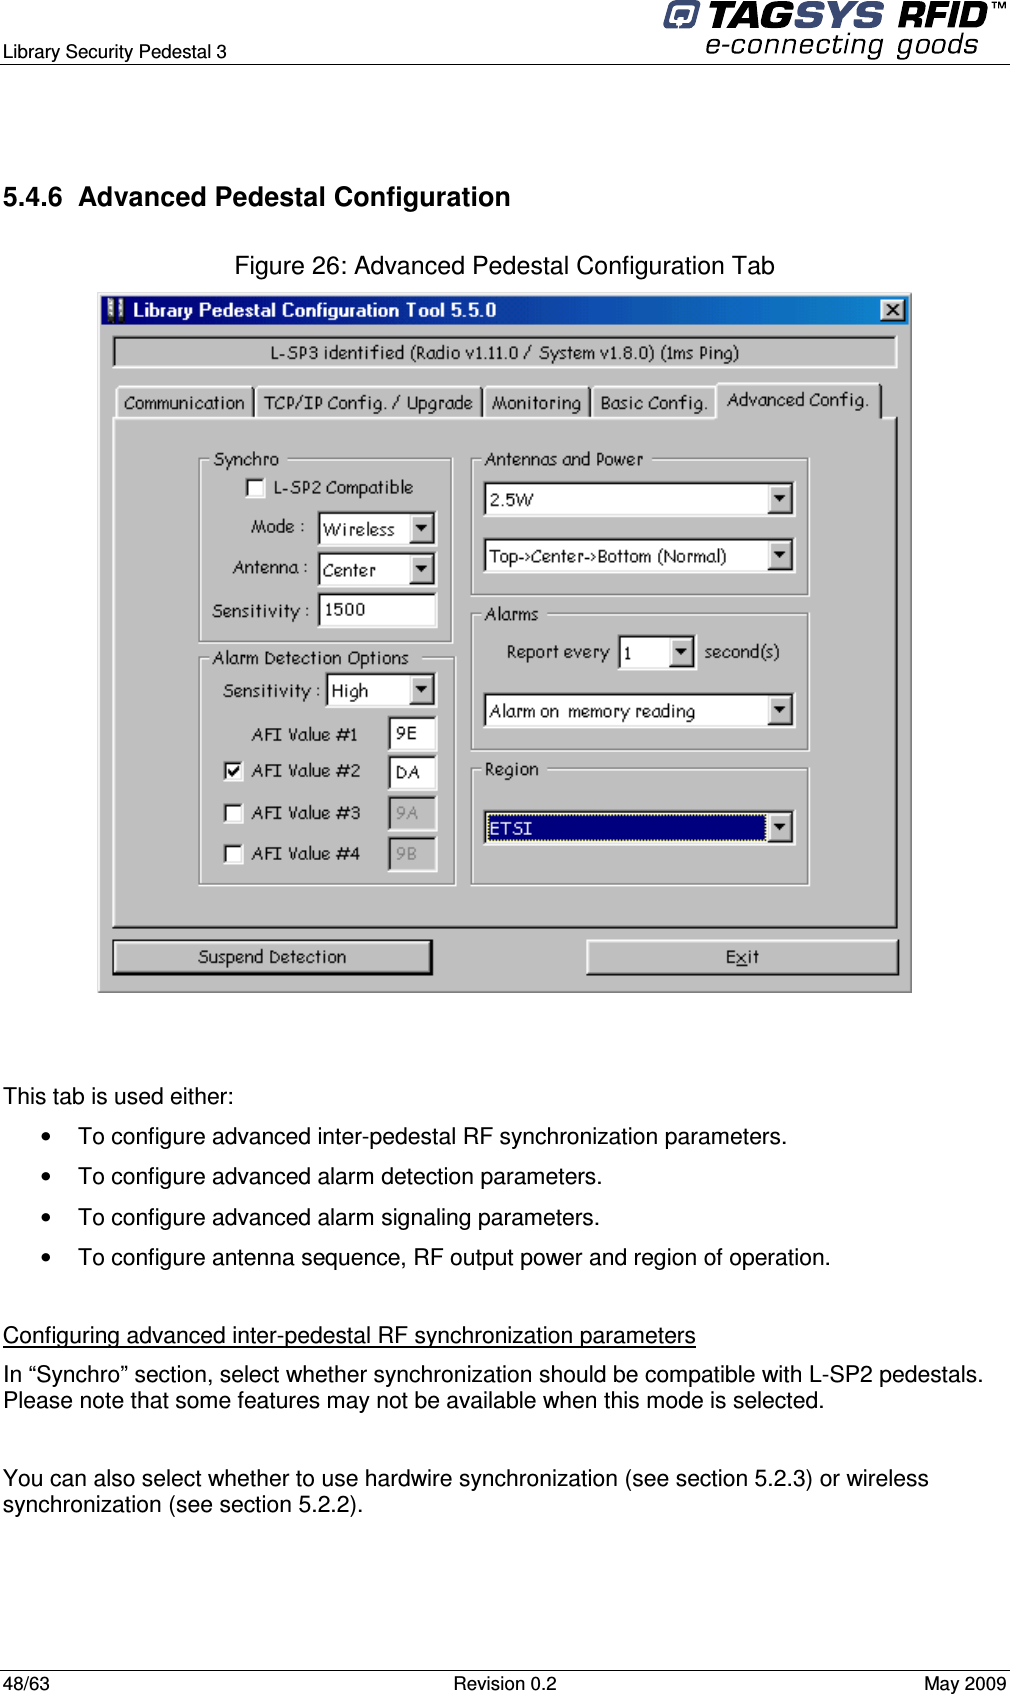  Library Security Pedestal 3   48/63  Revision 0.2  May 2009  5.4.6  Advanced Pedestal Configuration  Figure 26: Advanced Pedestal Configuration Tab    This tab is used either: •  To configure advanced inter-pedestal RF synchronization parameters. •  To configure advanced alarm detection parameters. •  To configure advanced alarm signaling parameters. •  To configure antenna sequence, RF output power and region of operation.  Configuring advanced inter-pedestal RF synchronization parameters In “Synchro” section, select whether synchronization should be compatible with L-SP2 pedestals. Please note that some features may not be available when this mode is selected.  You can also select whether to use hardwire synchronization (see section 5.2.3) or wireless synchronization (see section 5.2.2).    